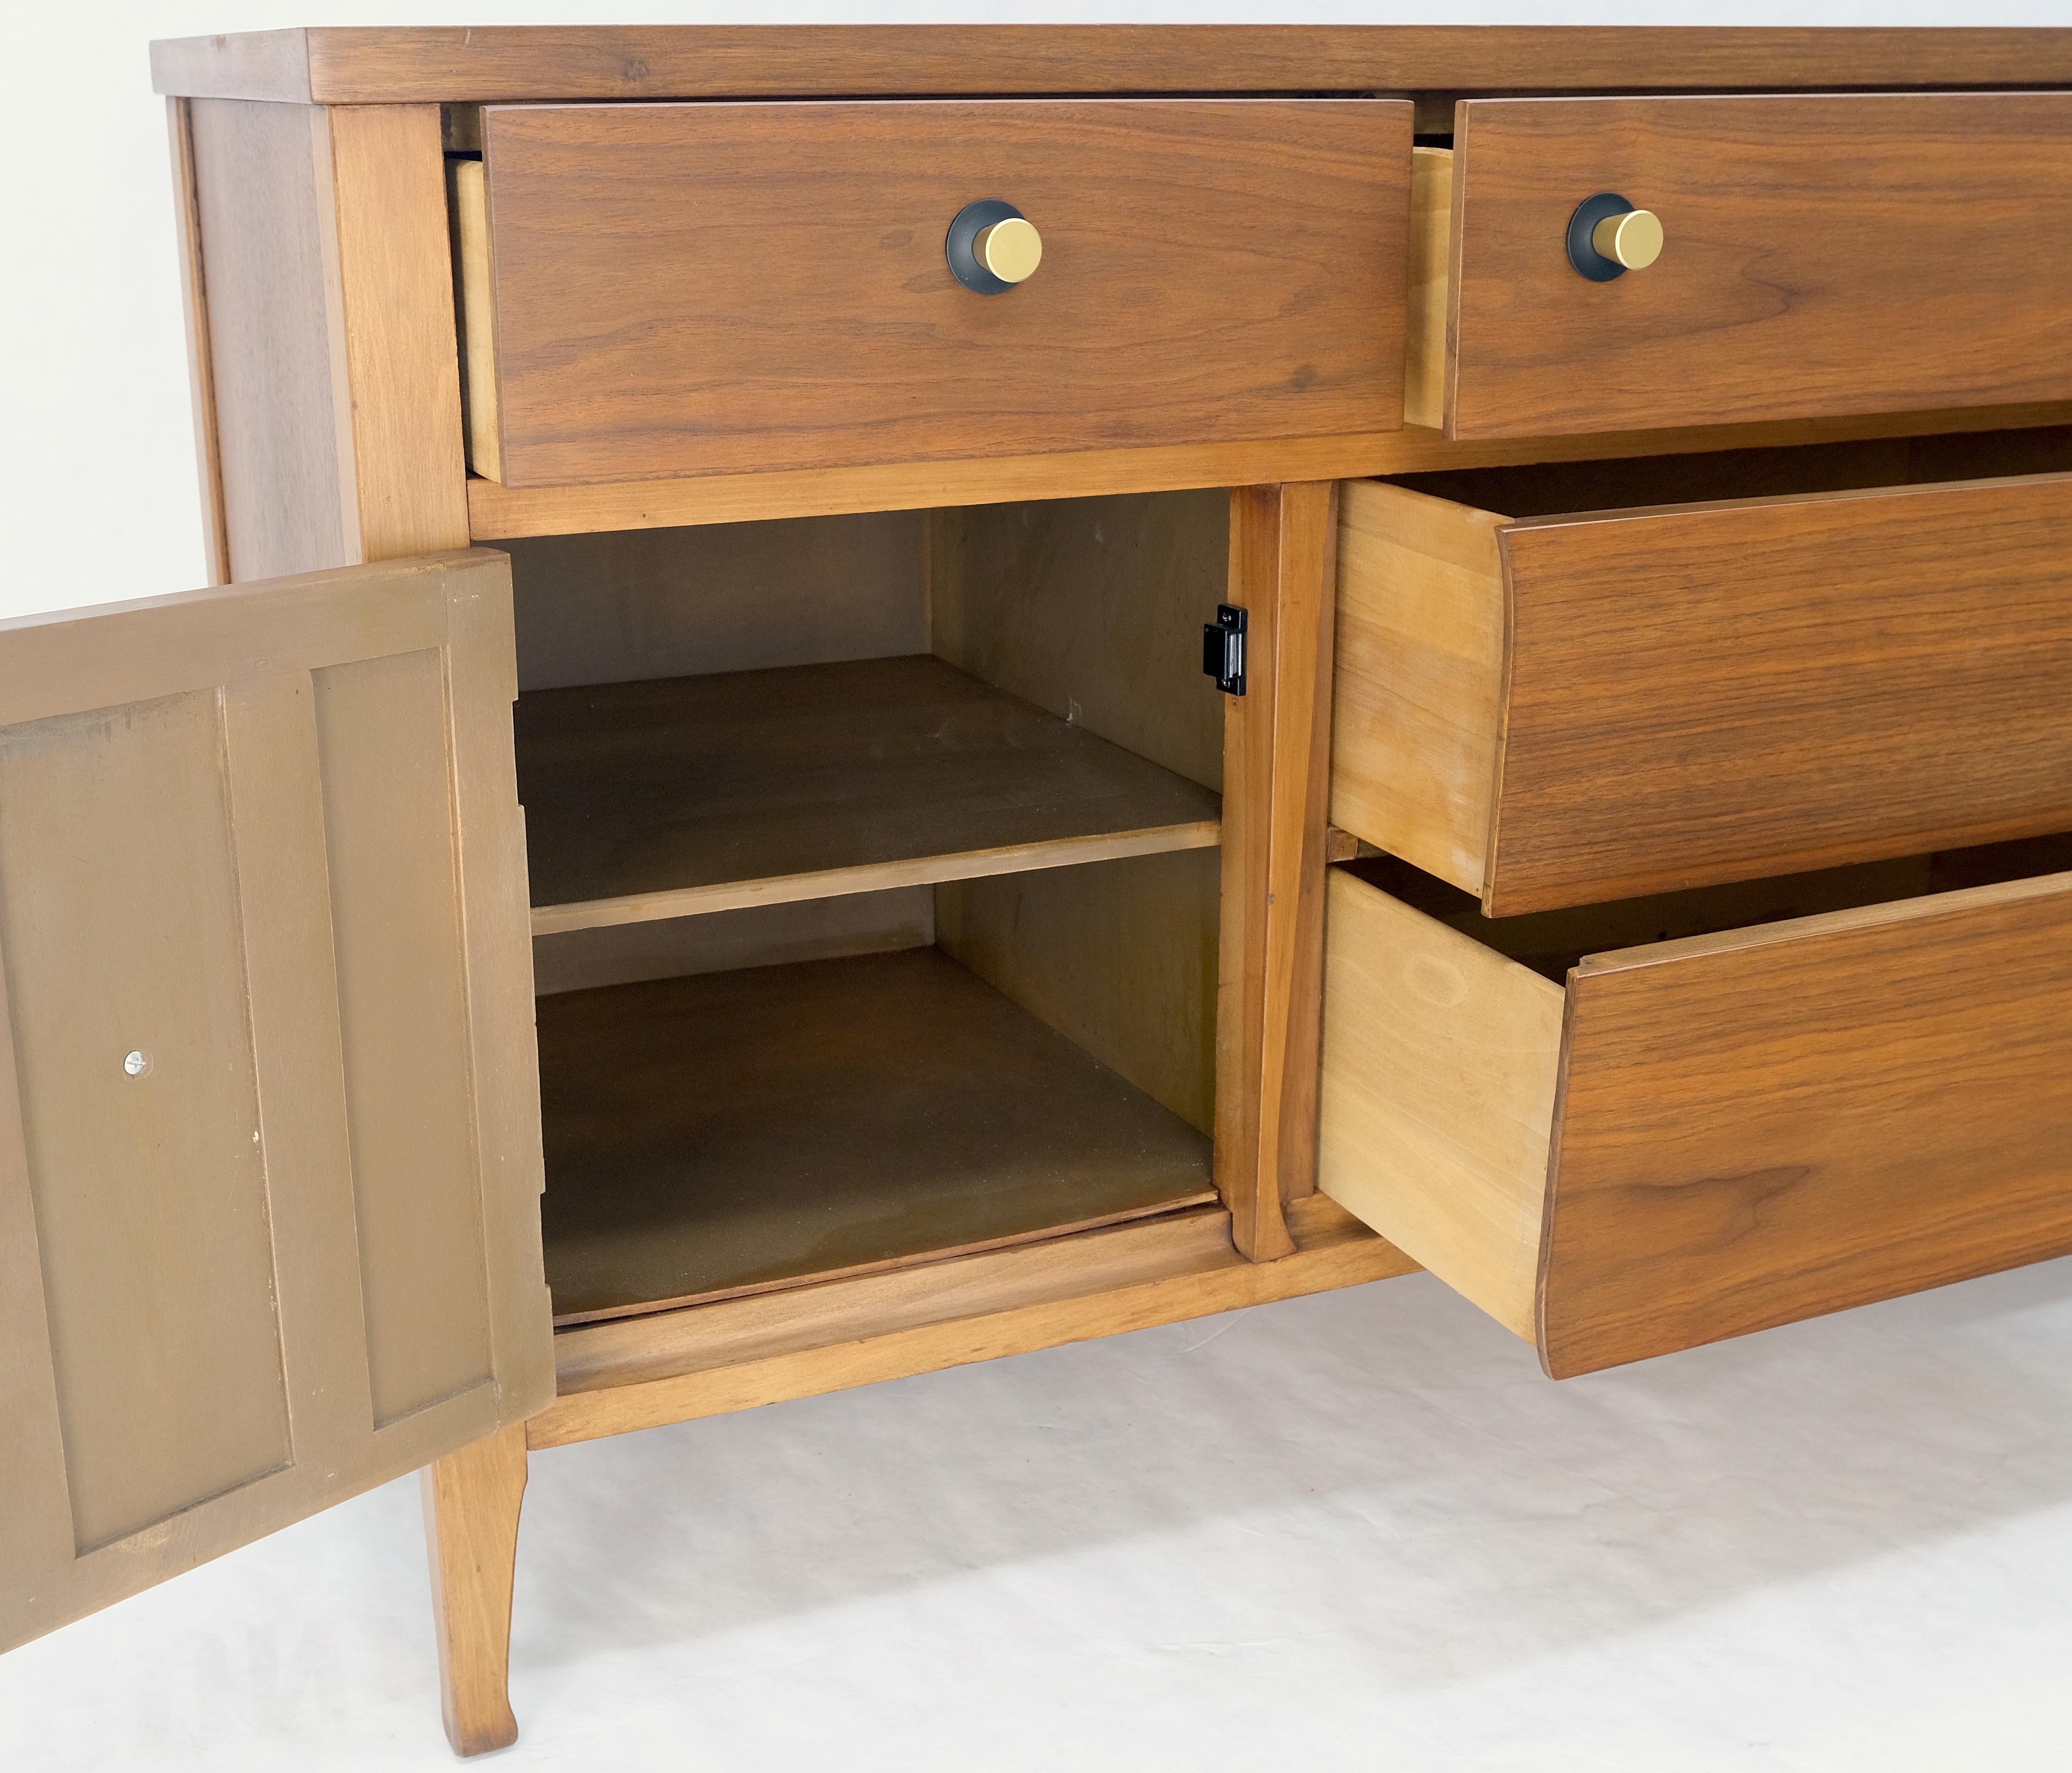 Lacquered American Walnut Dresser Credenza 4 Drawers Two Door Compartment Brass Pulls MINT For Sale